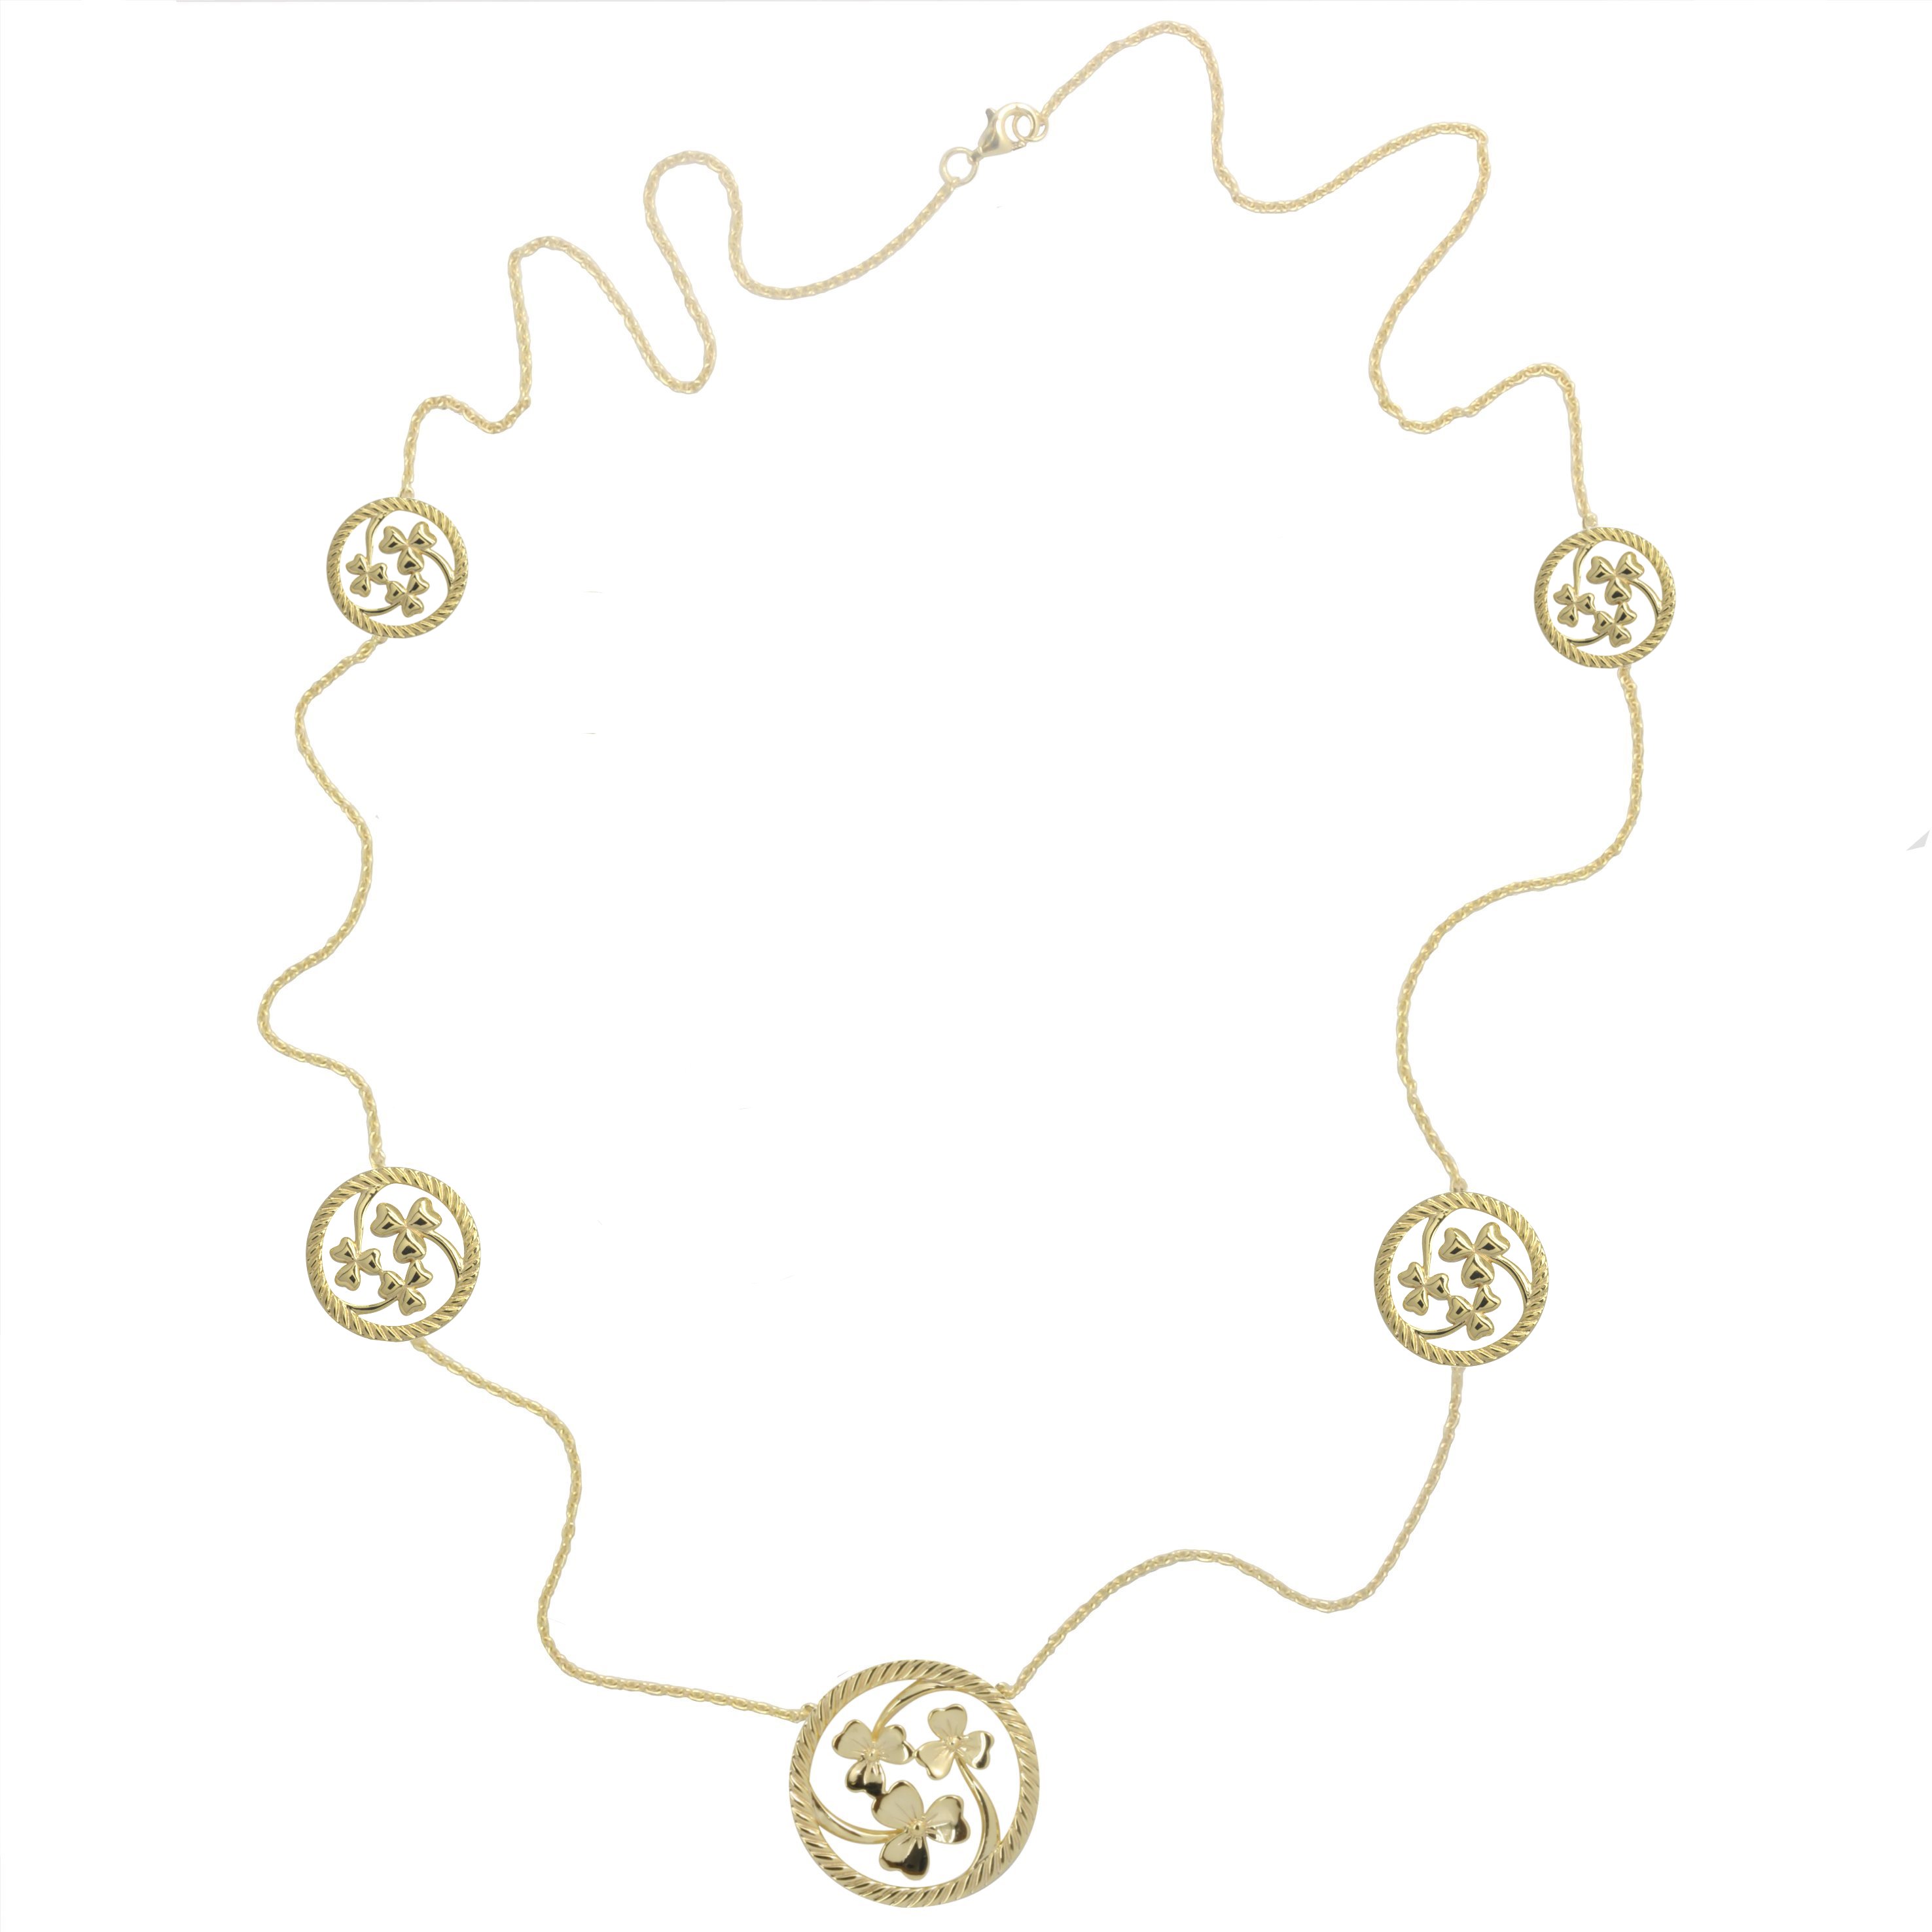 Product image for Irish Necklace | Gold Plated Sterling Silver Shamrock Irish Necklet